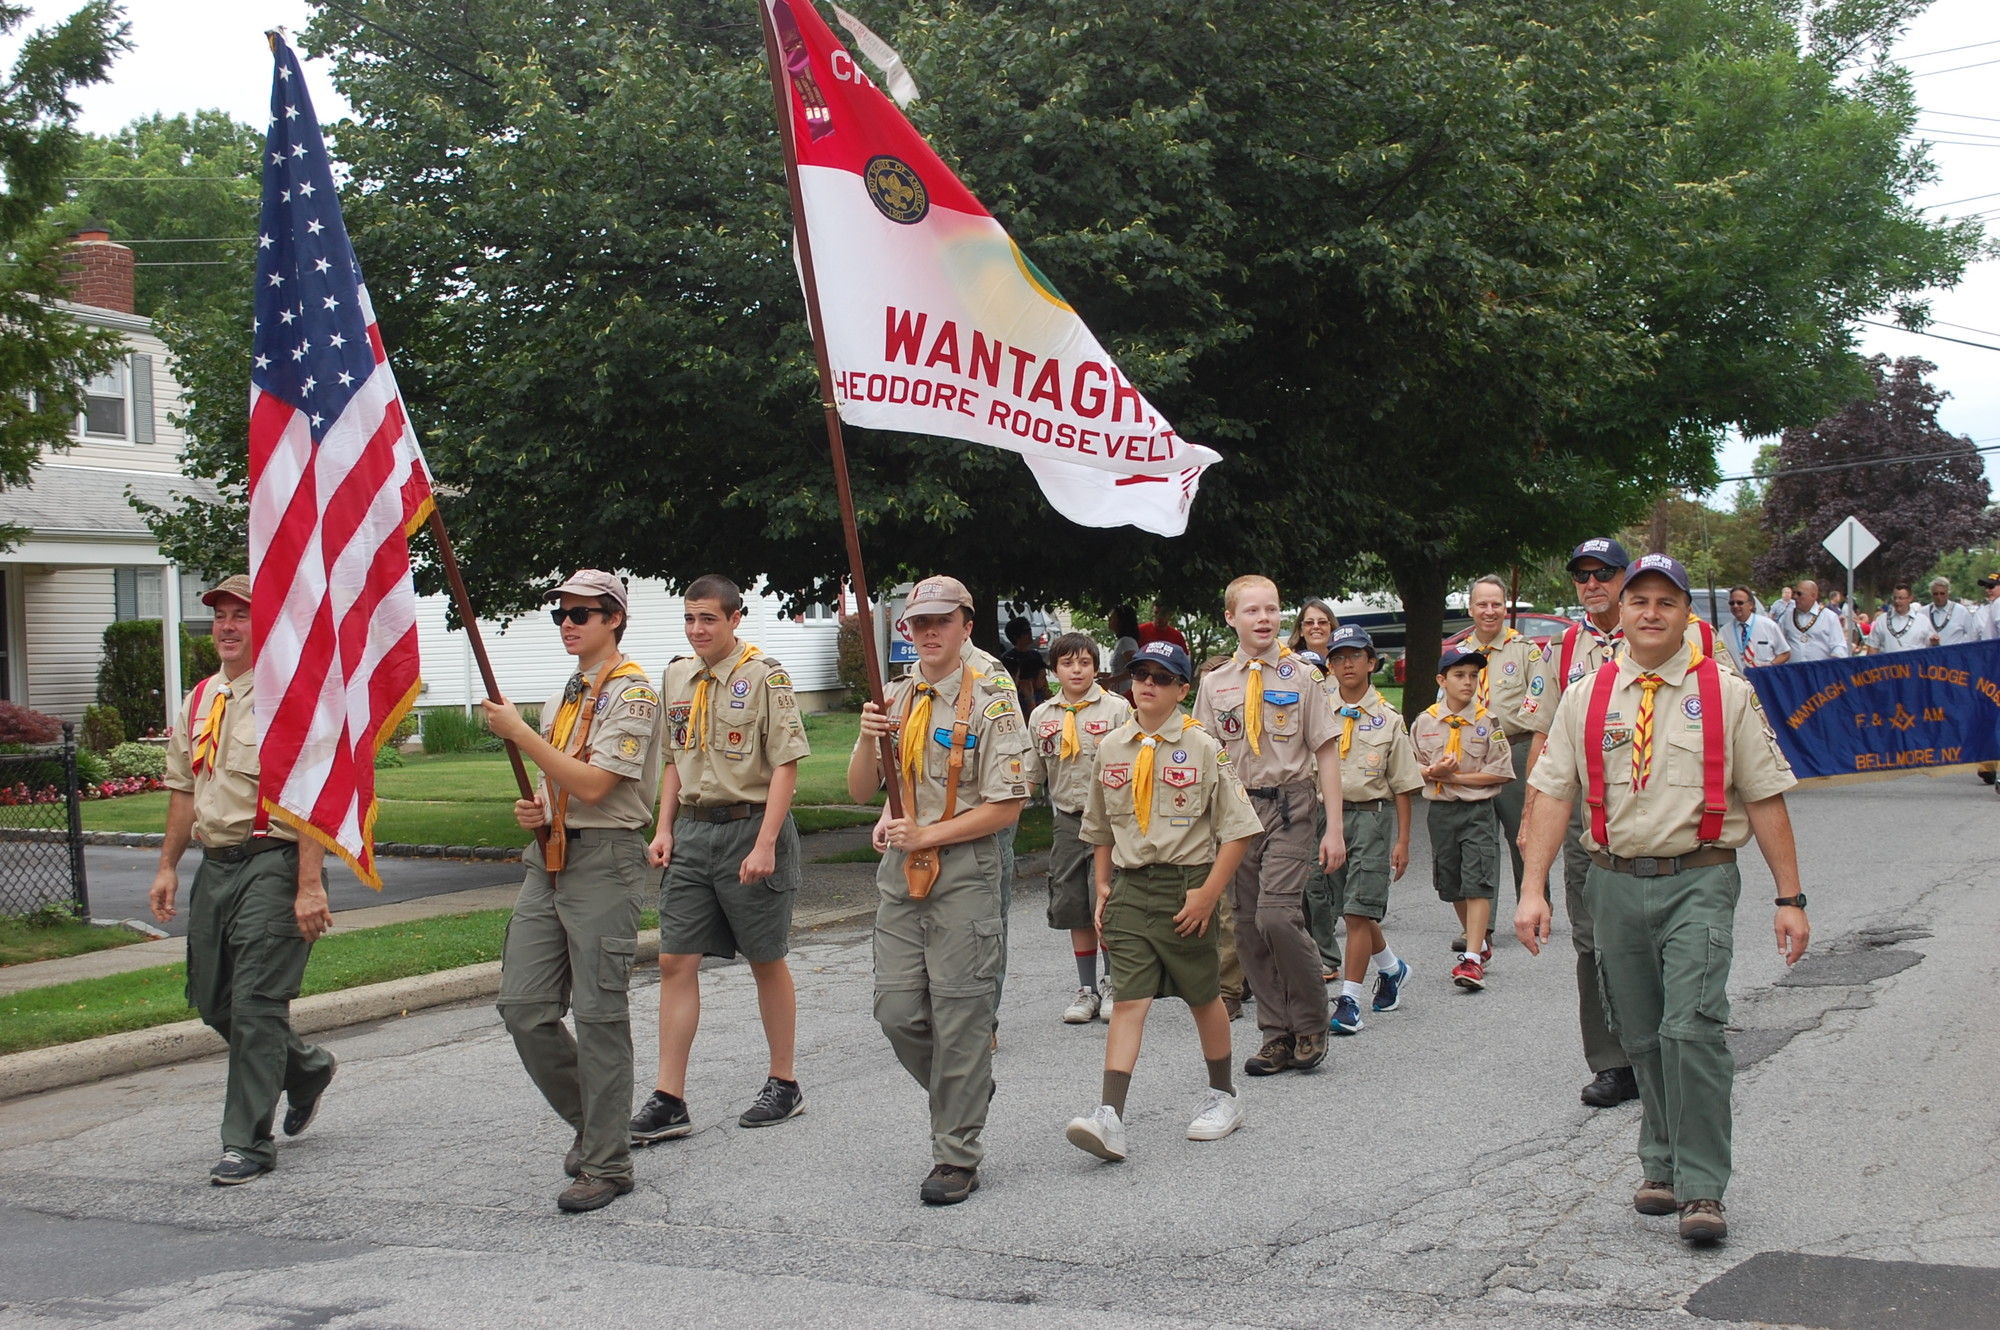 Boy Scouts from Troop 656 marched down Beech Street.